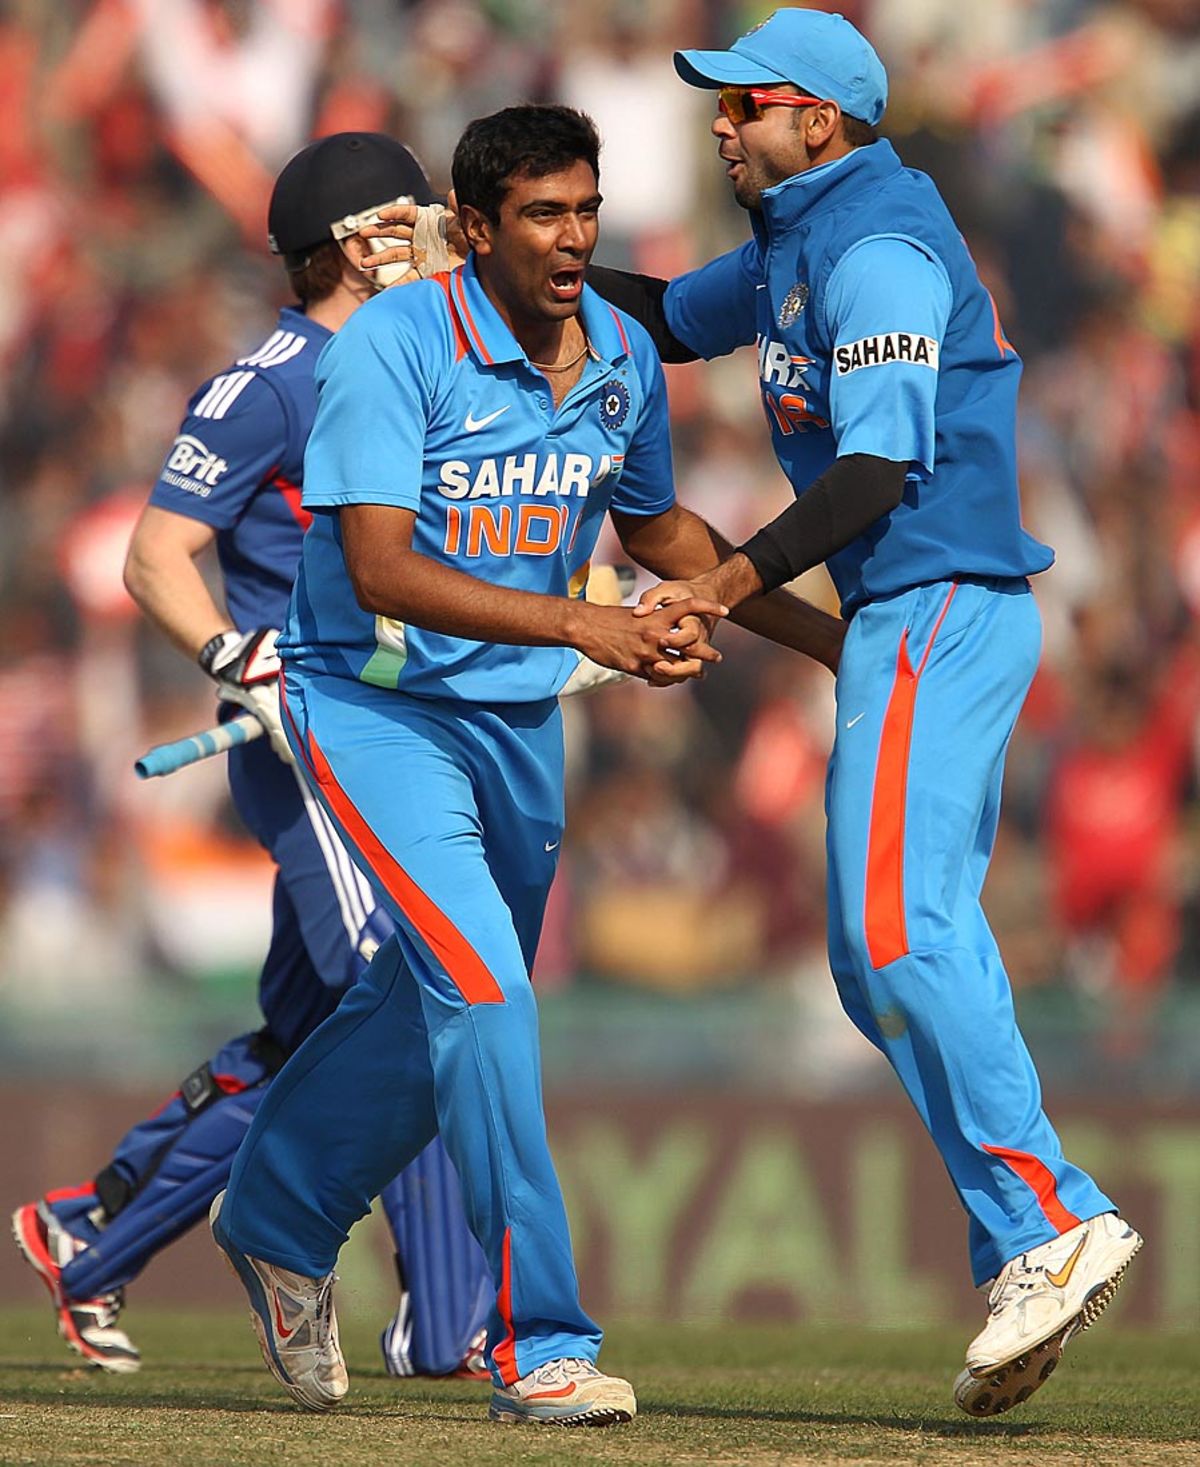 R Ashwin took two quick wickets to bring India back into the contest, India v England, 4th ODI, Mohali, January 23, 2013